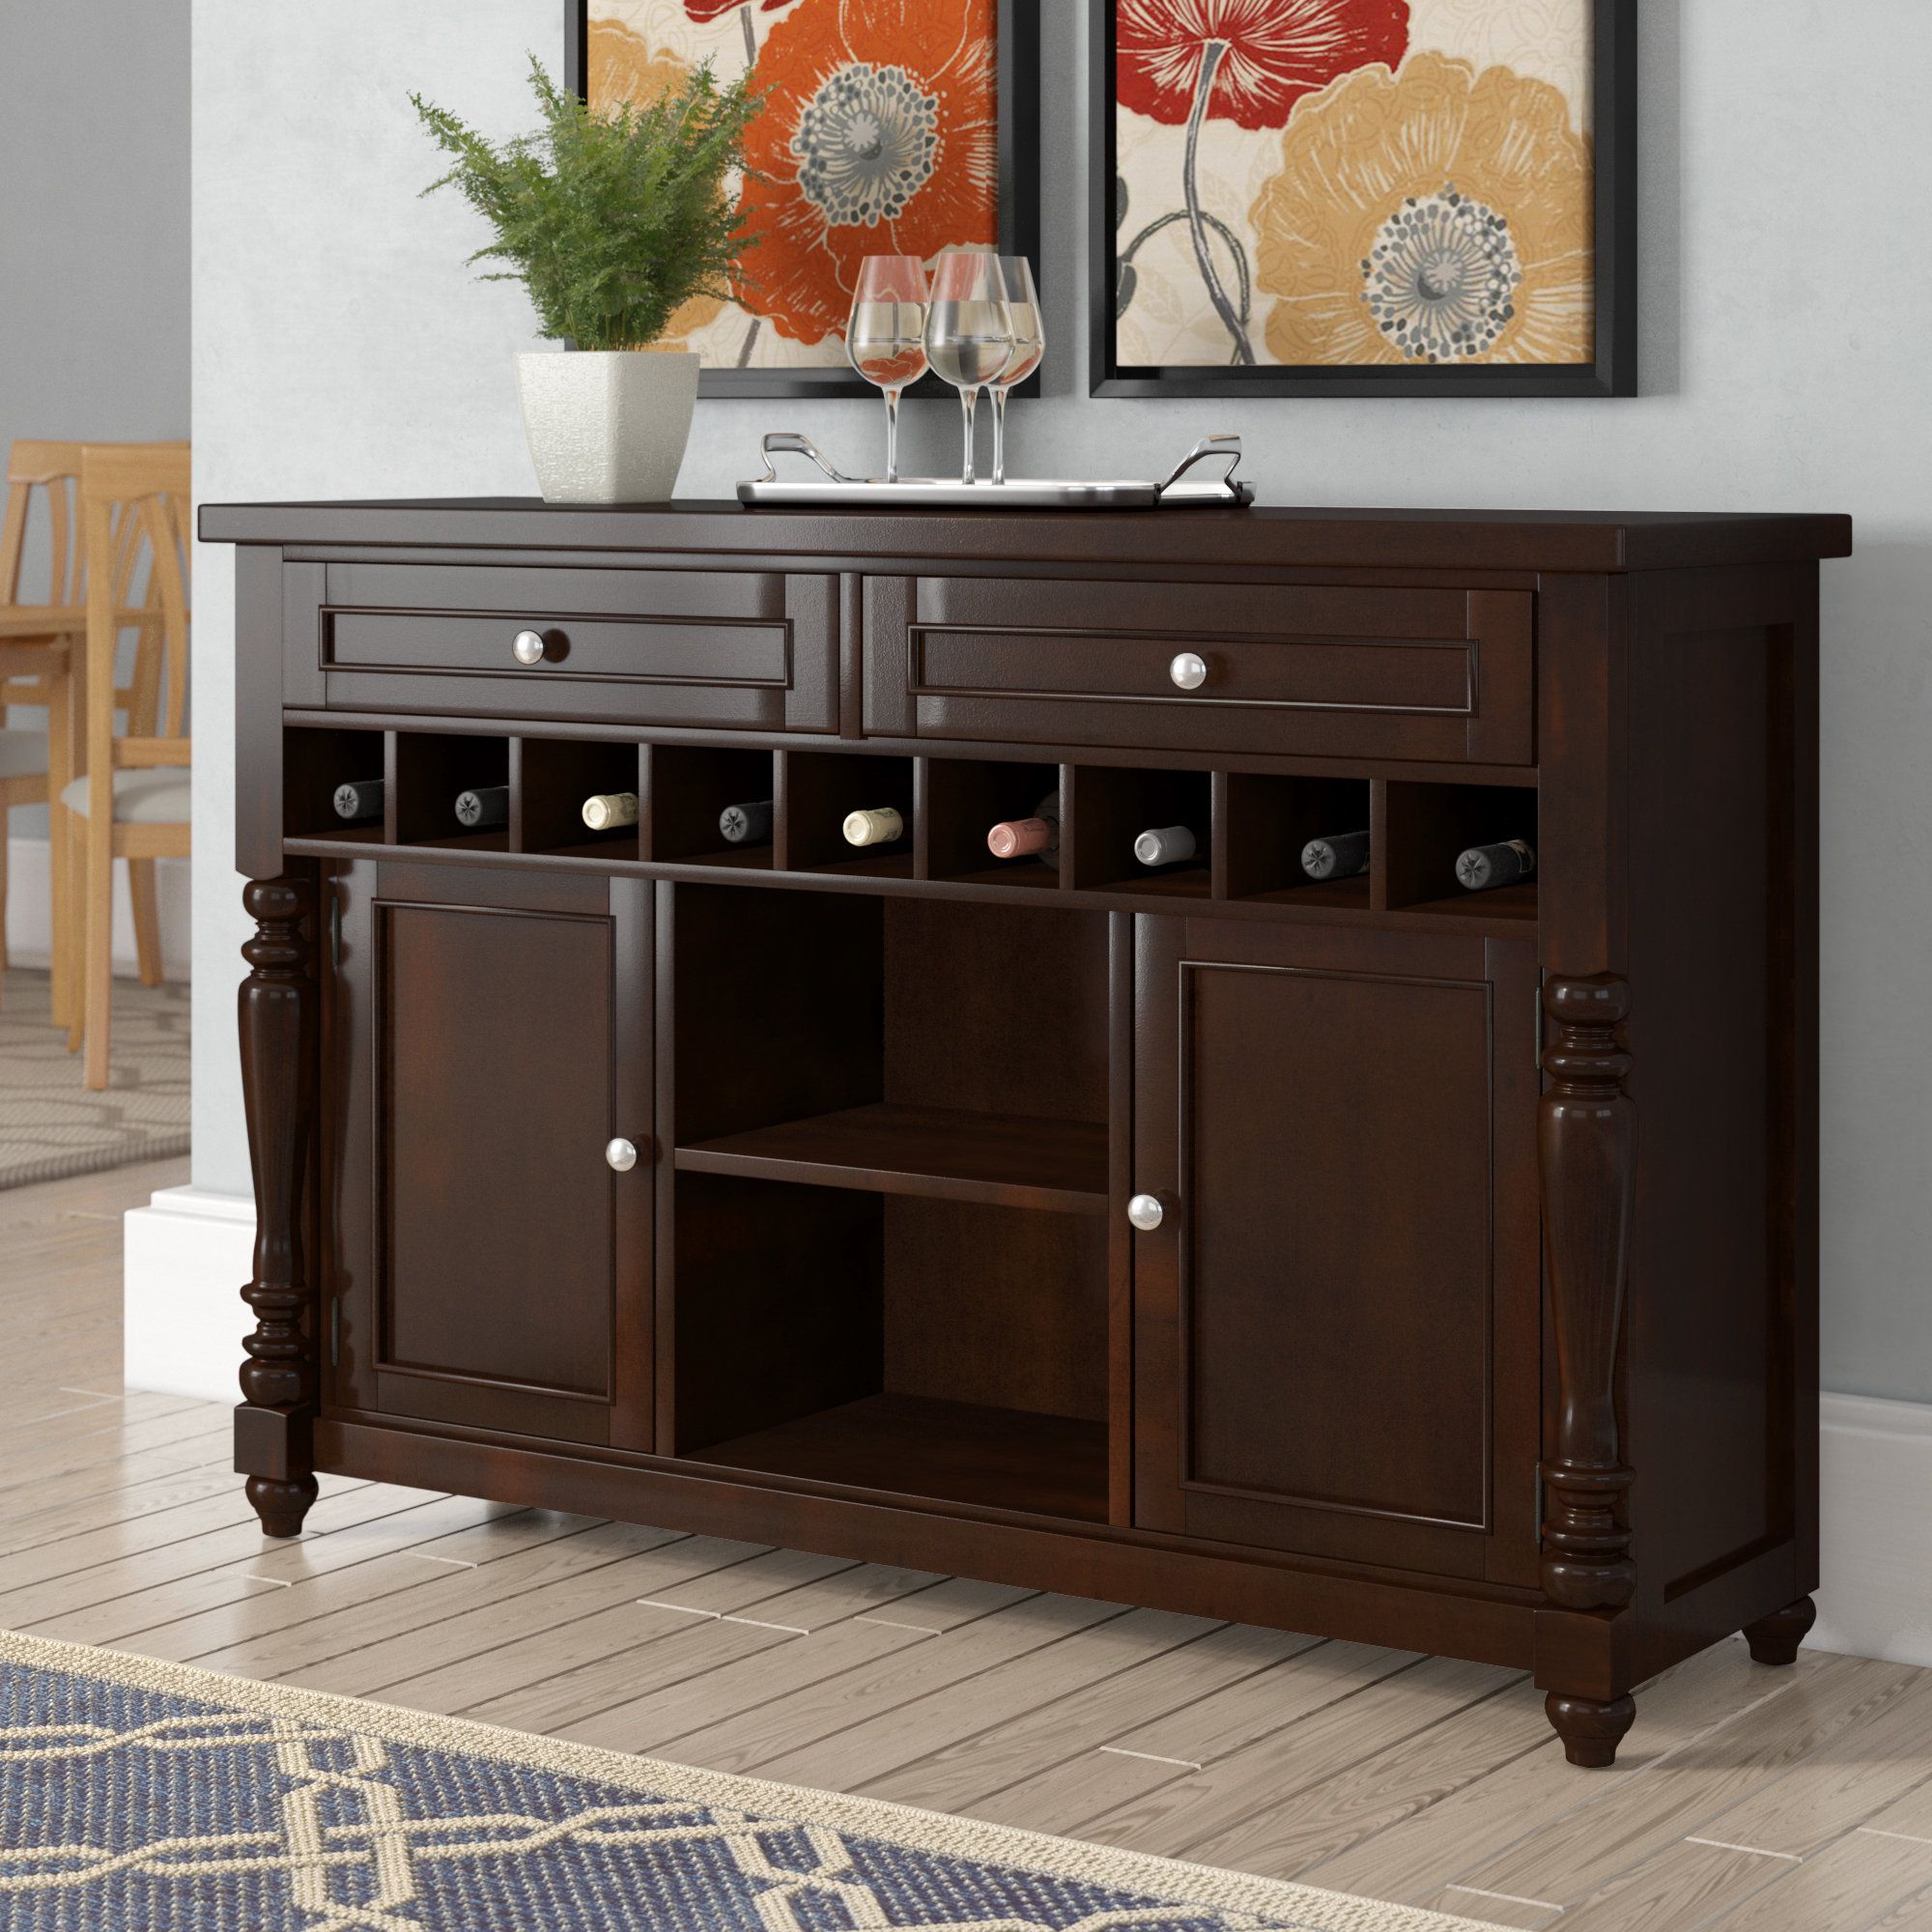 Serving Buffet | Wayfair Intended For Payton Serving Sideboards (View 13 of 30)